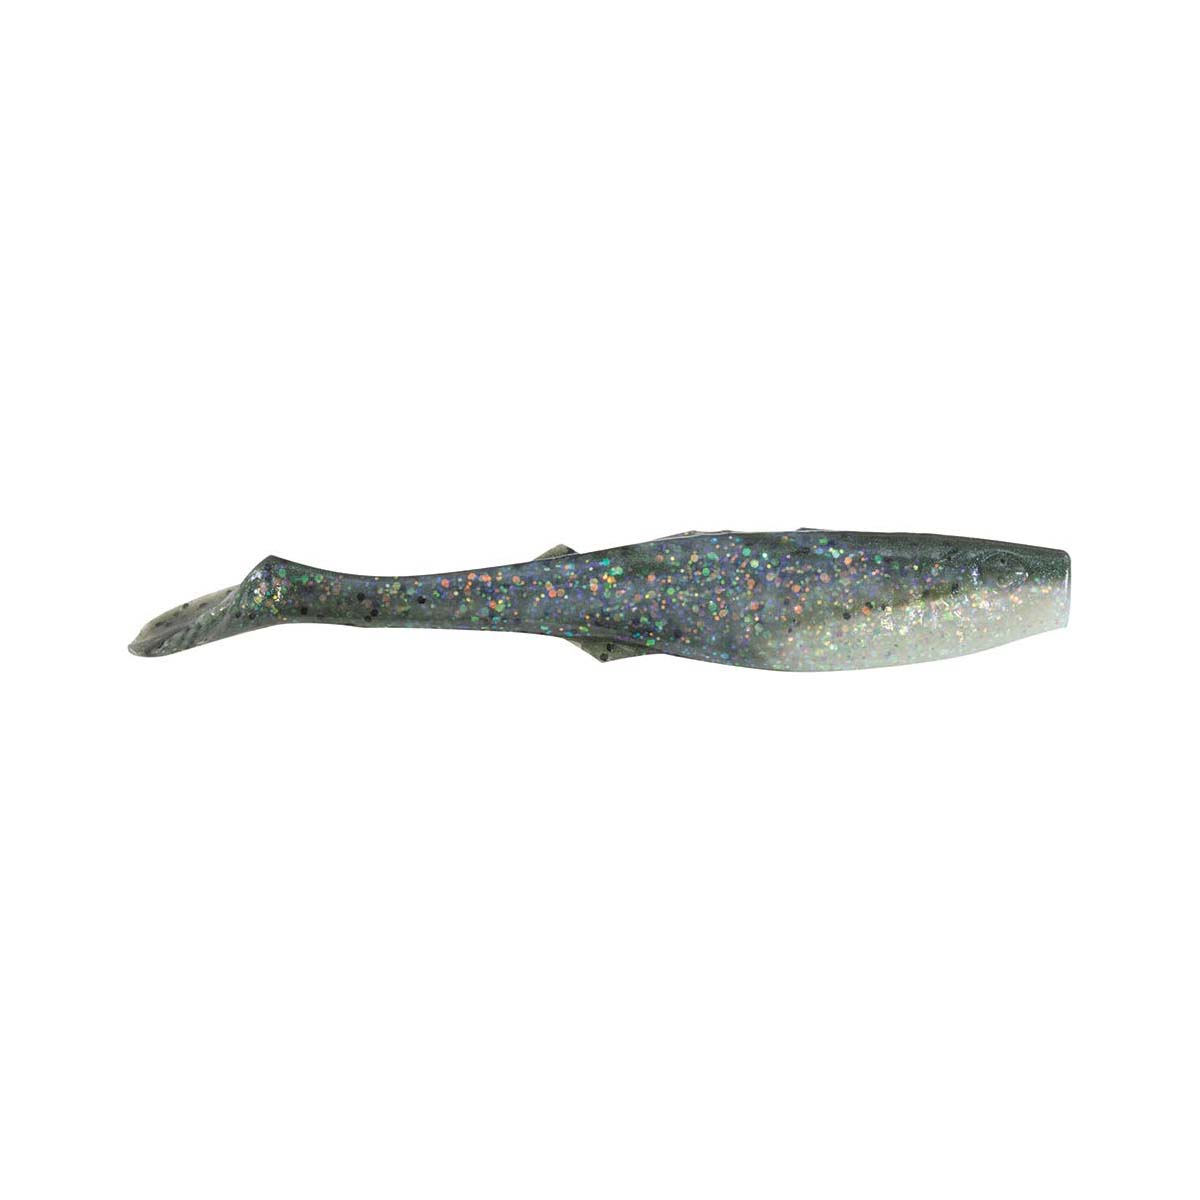 Berkley Gulp! Paddletail Shad Soft Plastic Lure 6in Silver Molting